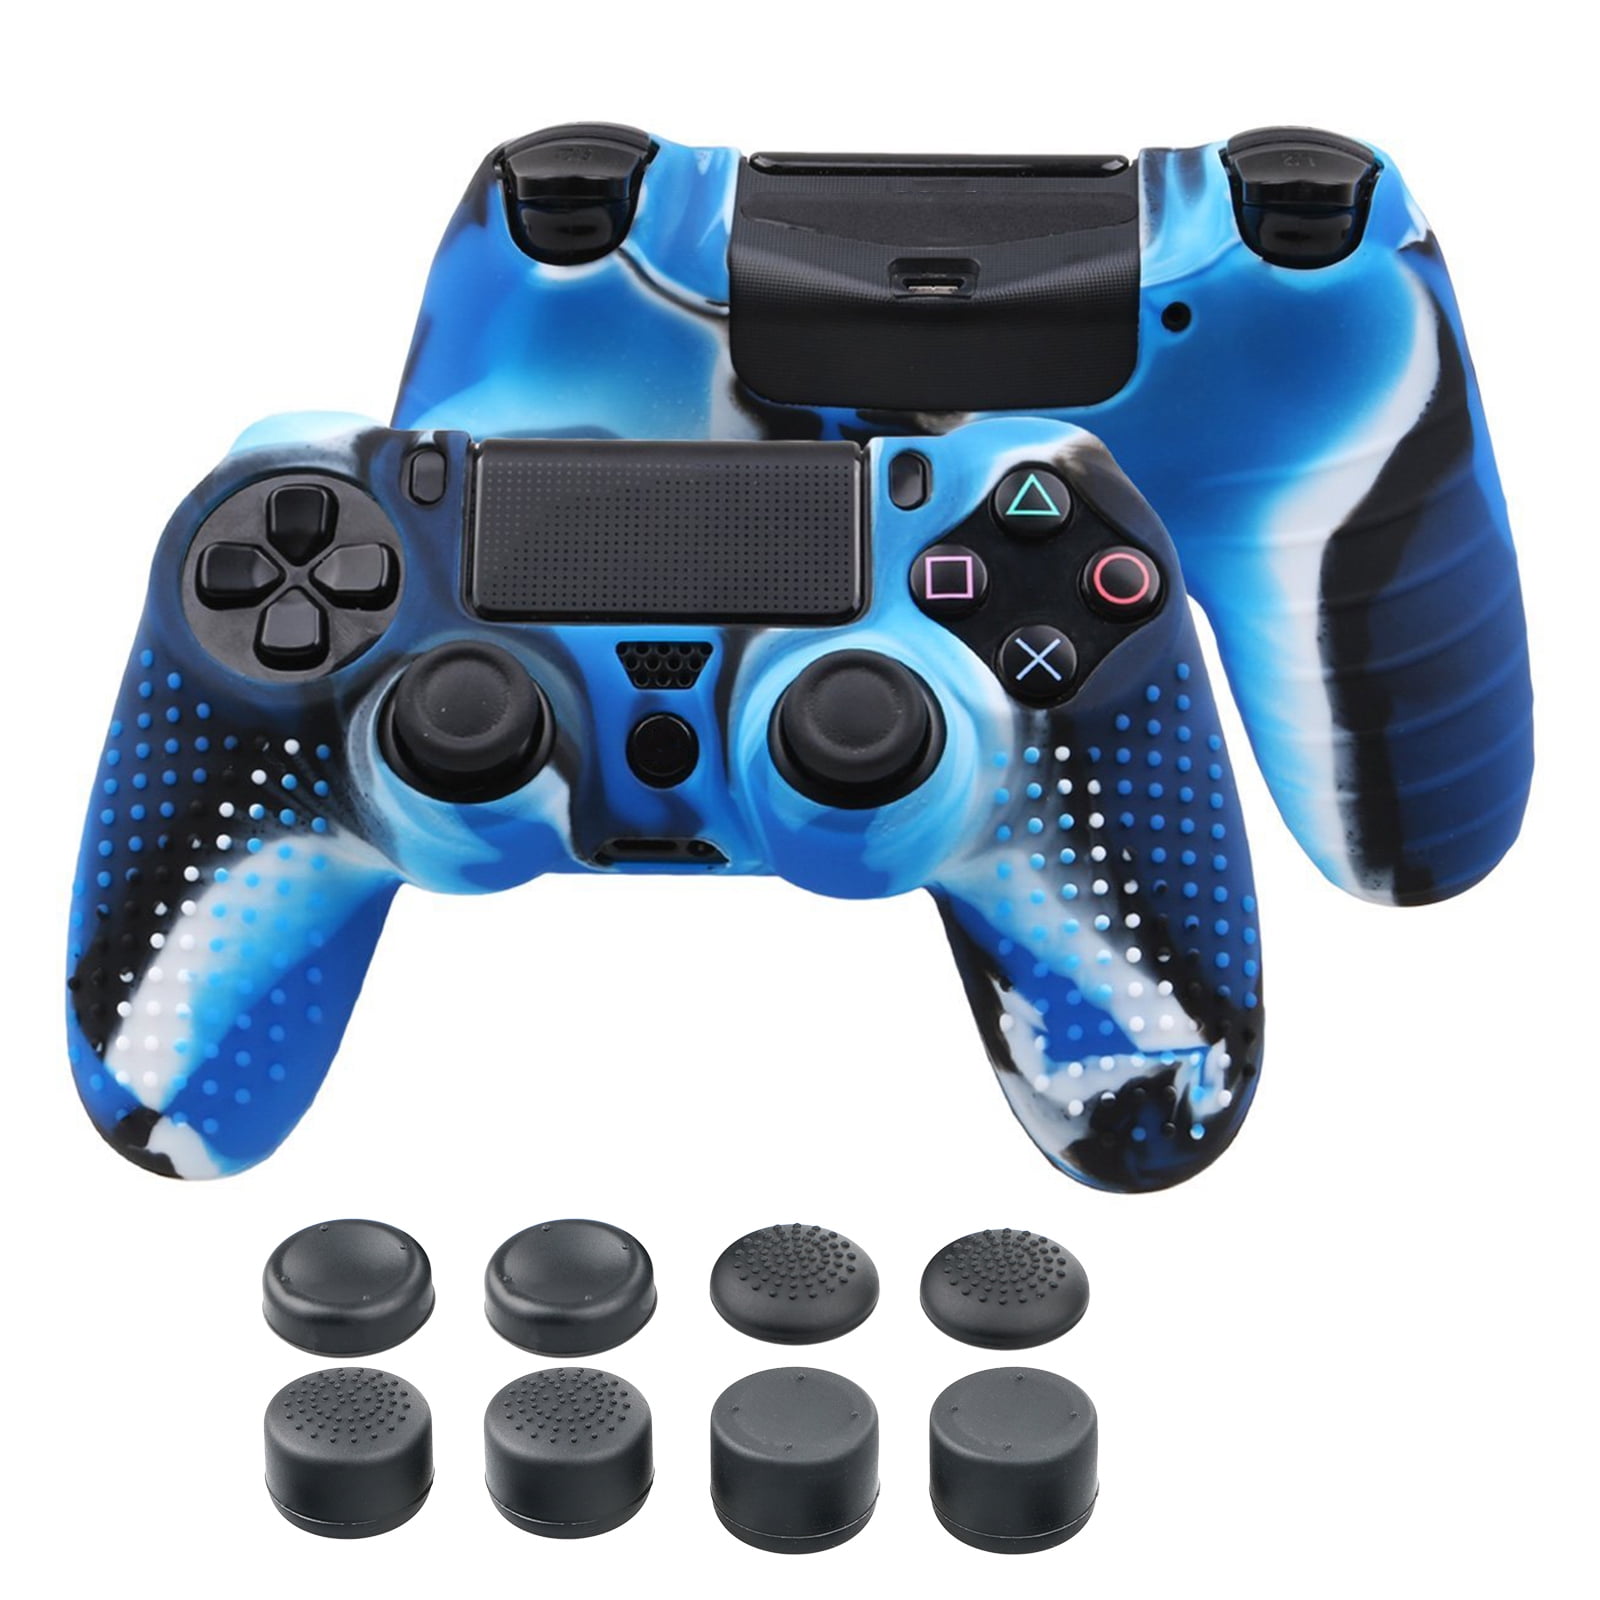 Controller Cover Skin Case, TSV Silicone Cover Case Grip Caps Fit for PlayStation PS4 Series Controller, 8 Thumbstick Grip Caps Compatible with PS4 Slim Pro, Xbox One Wireless Controller Gamepad